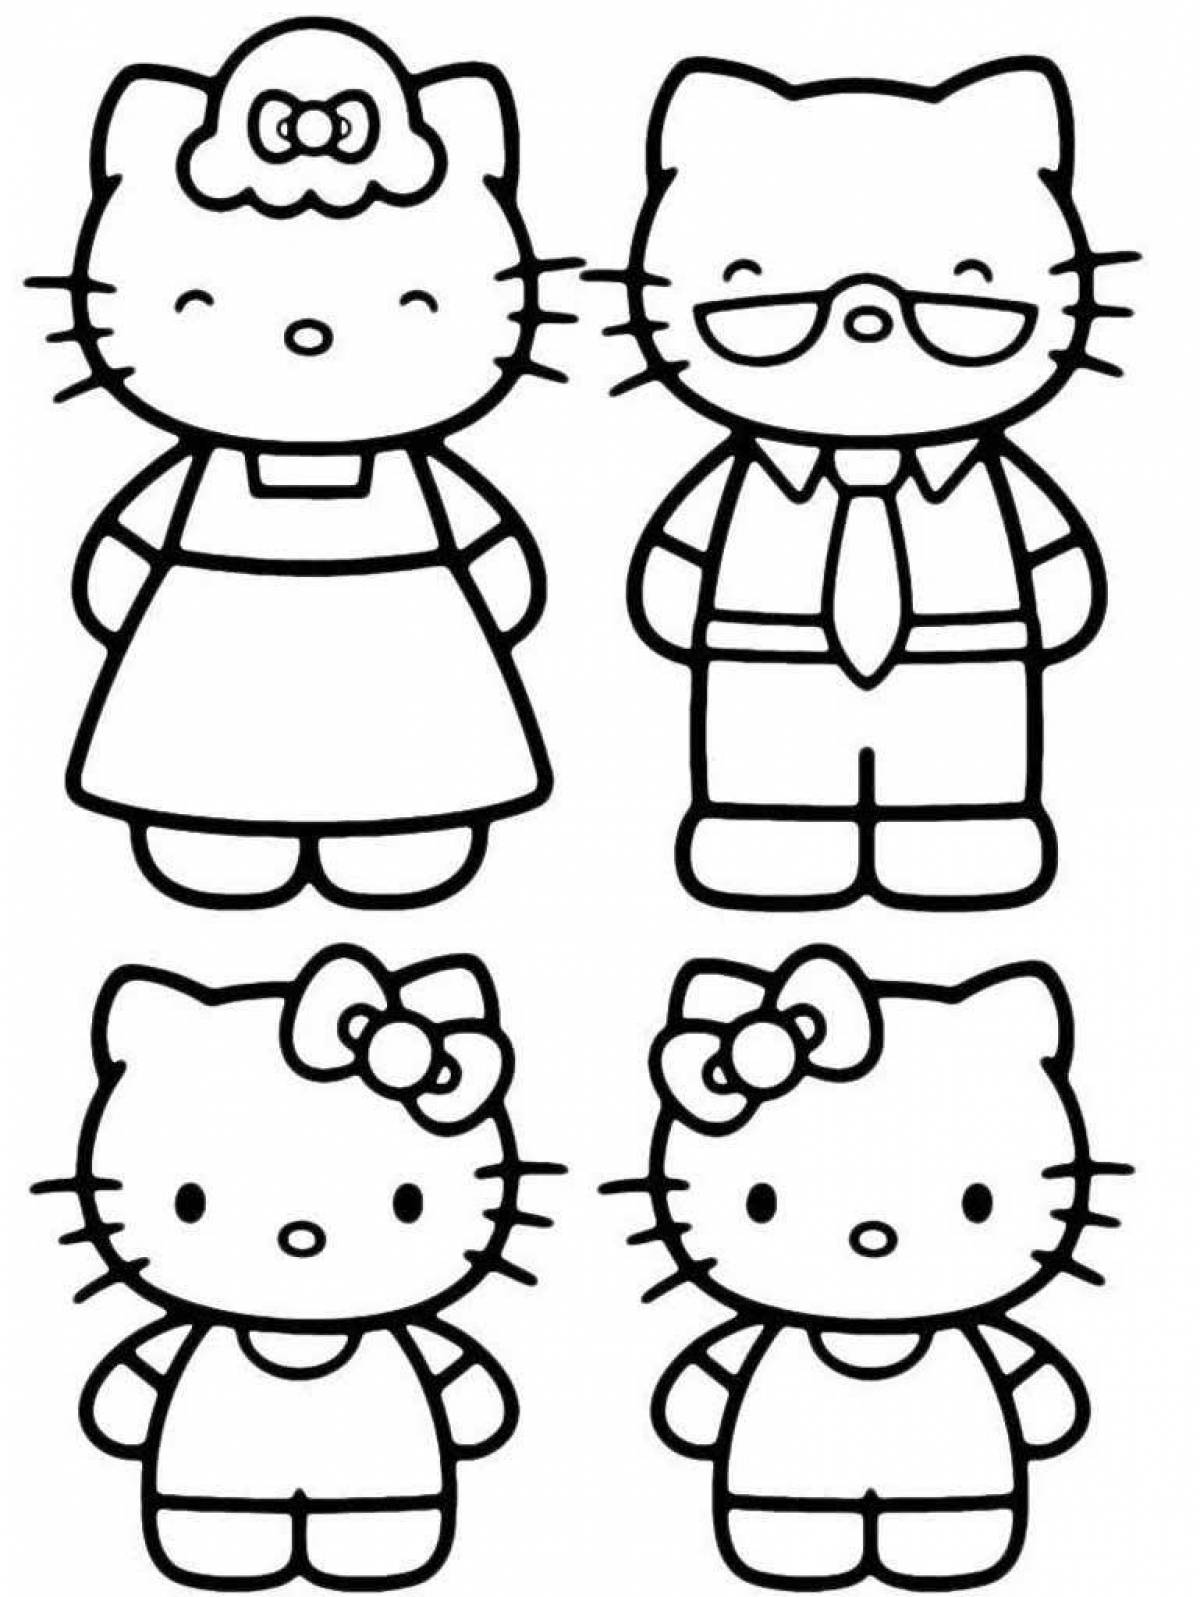 Sunny hello coloring page